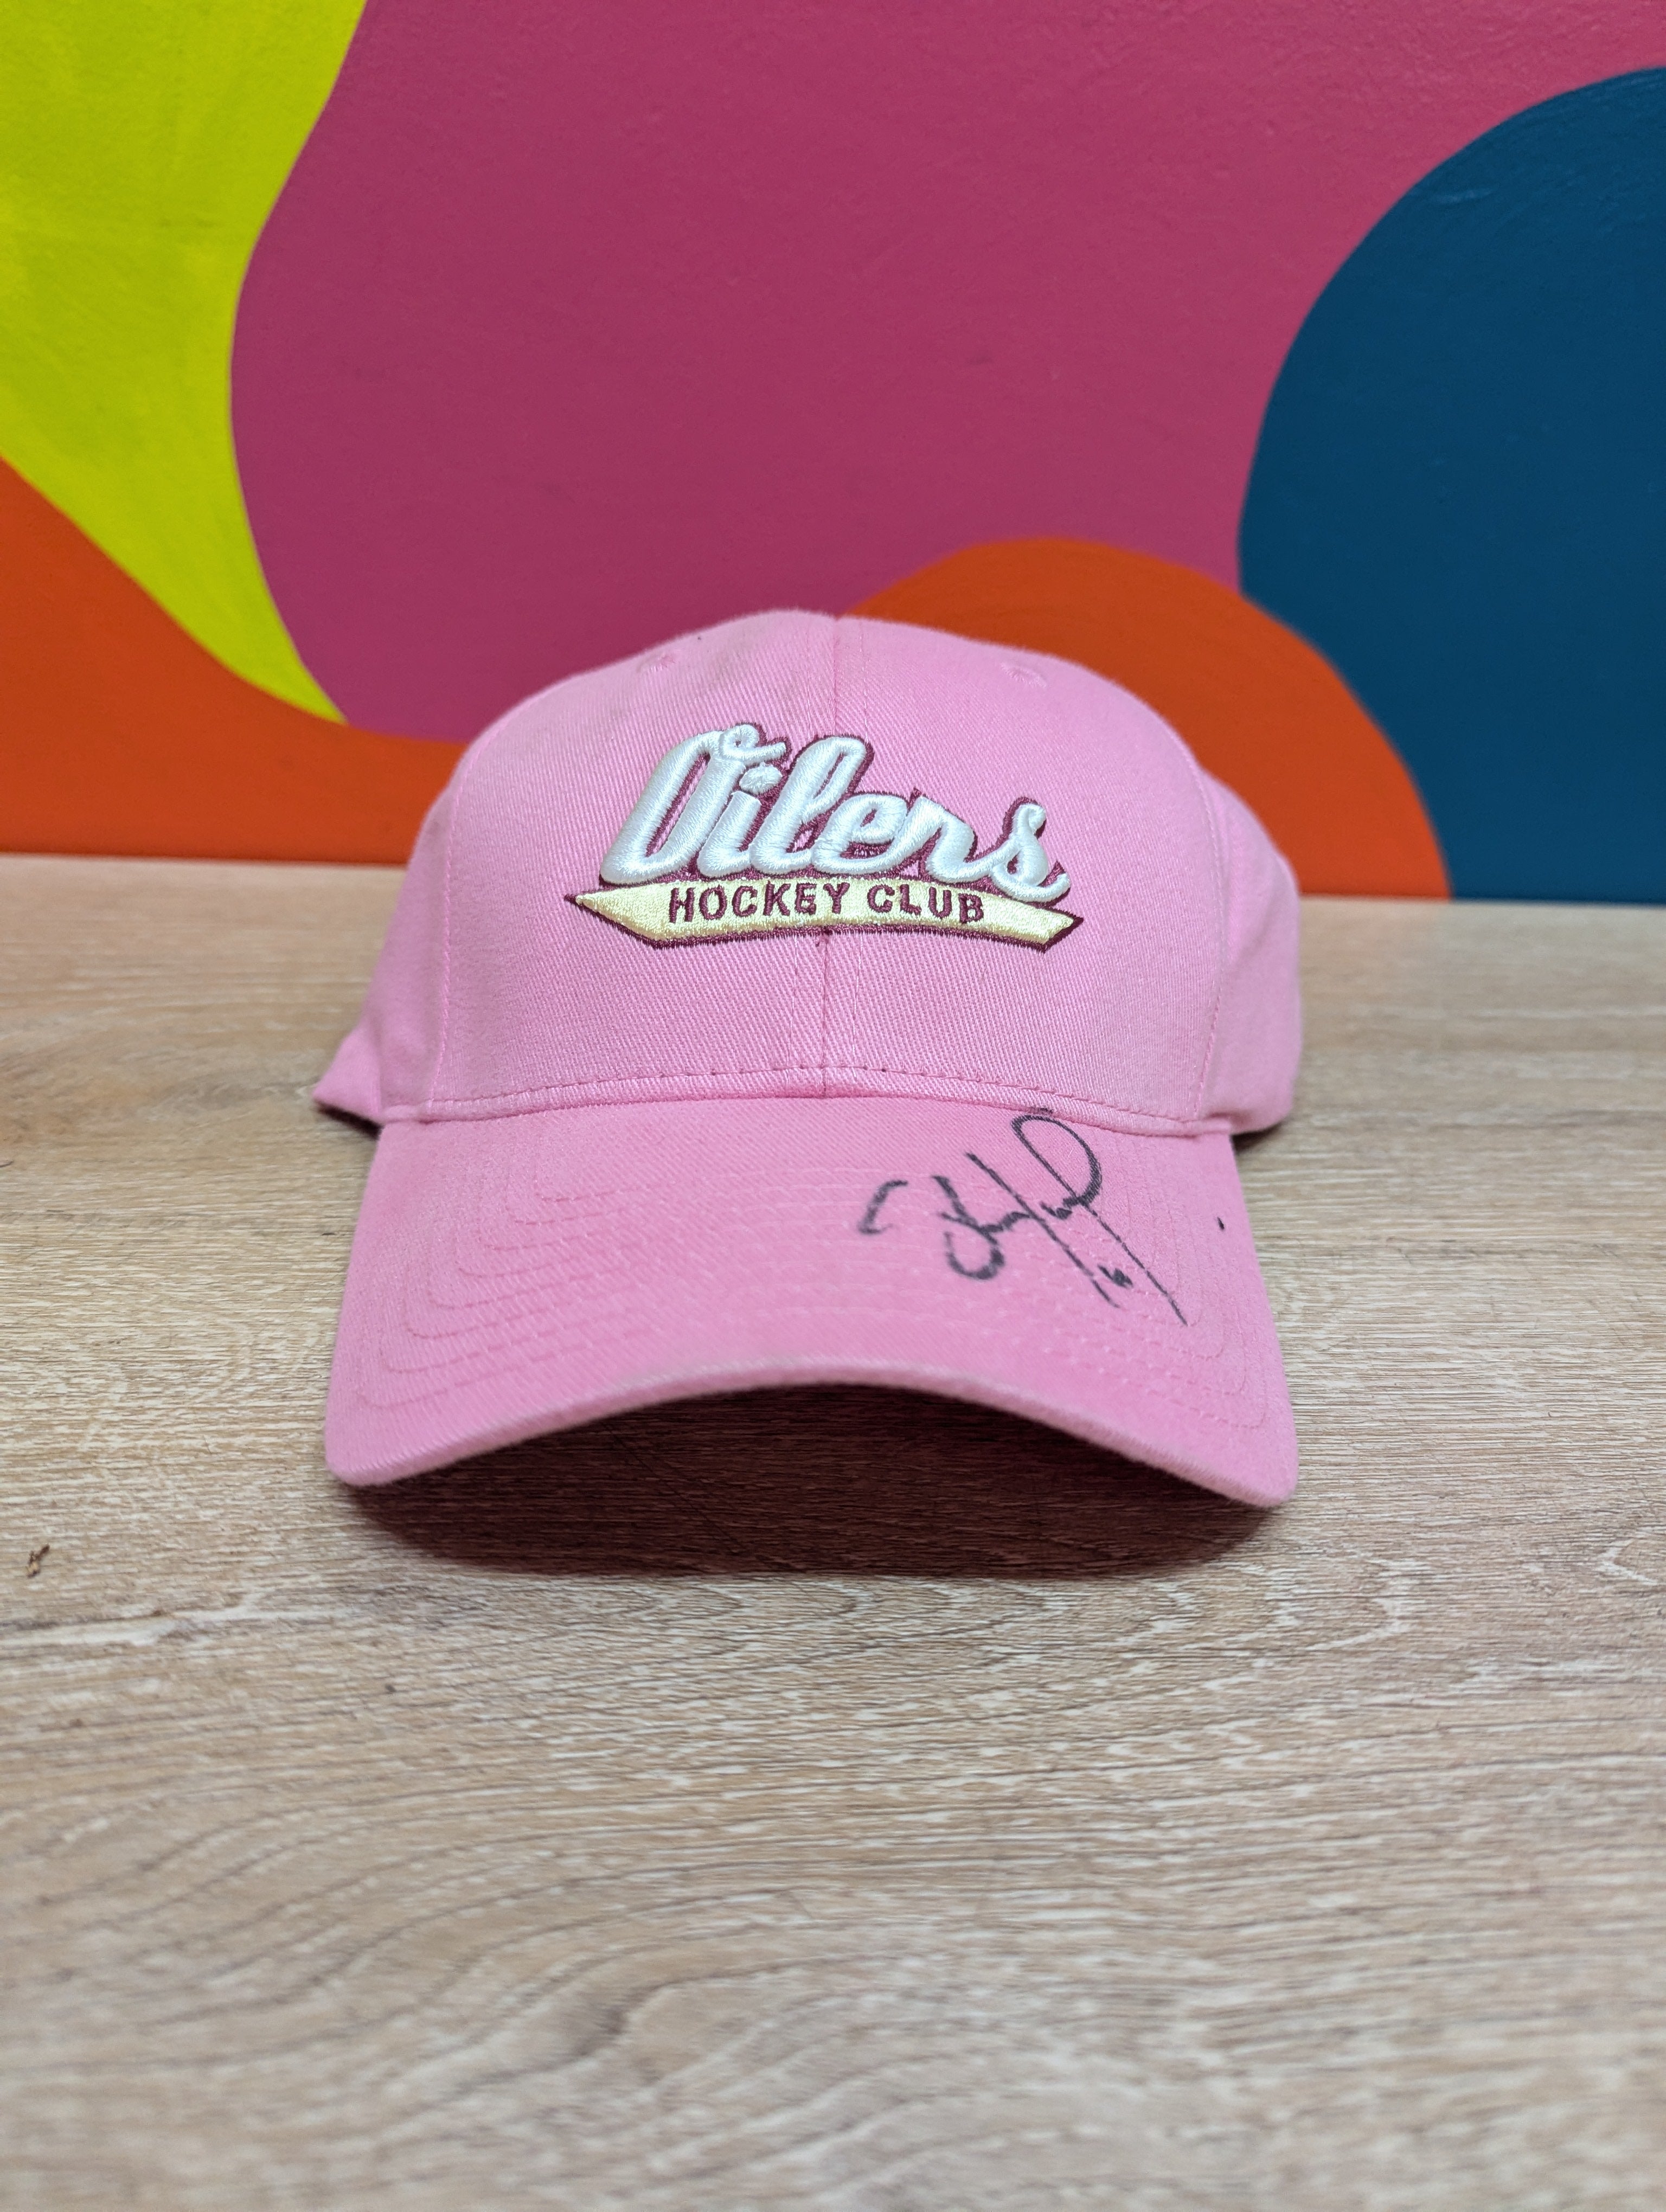 Oilers Hockey Club Hat Signed by Shawn Horcoff